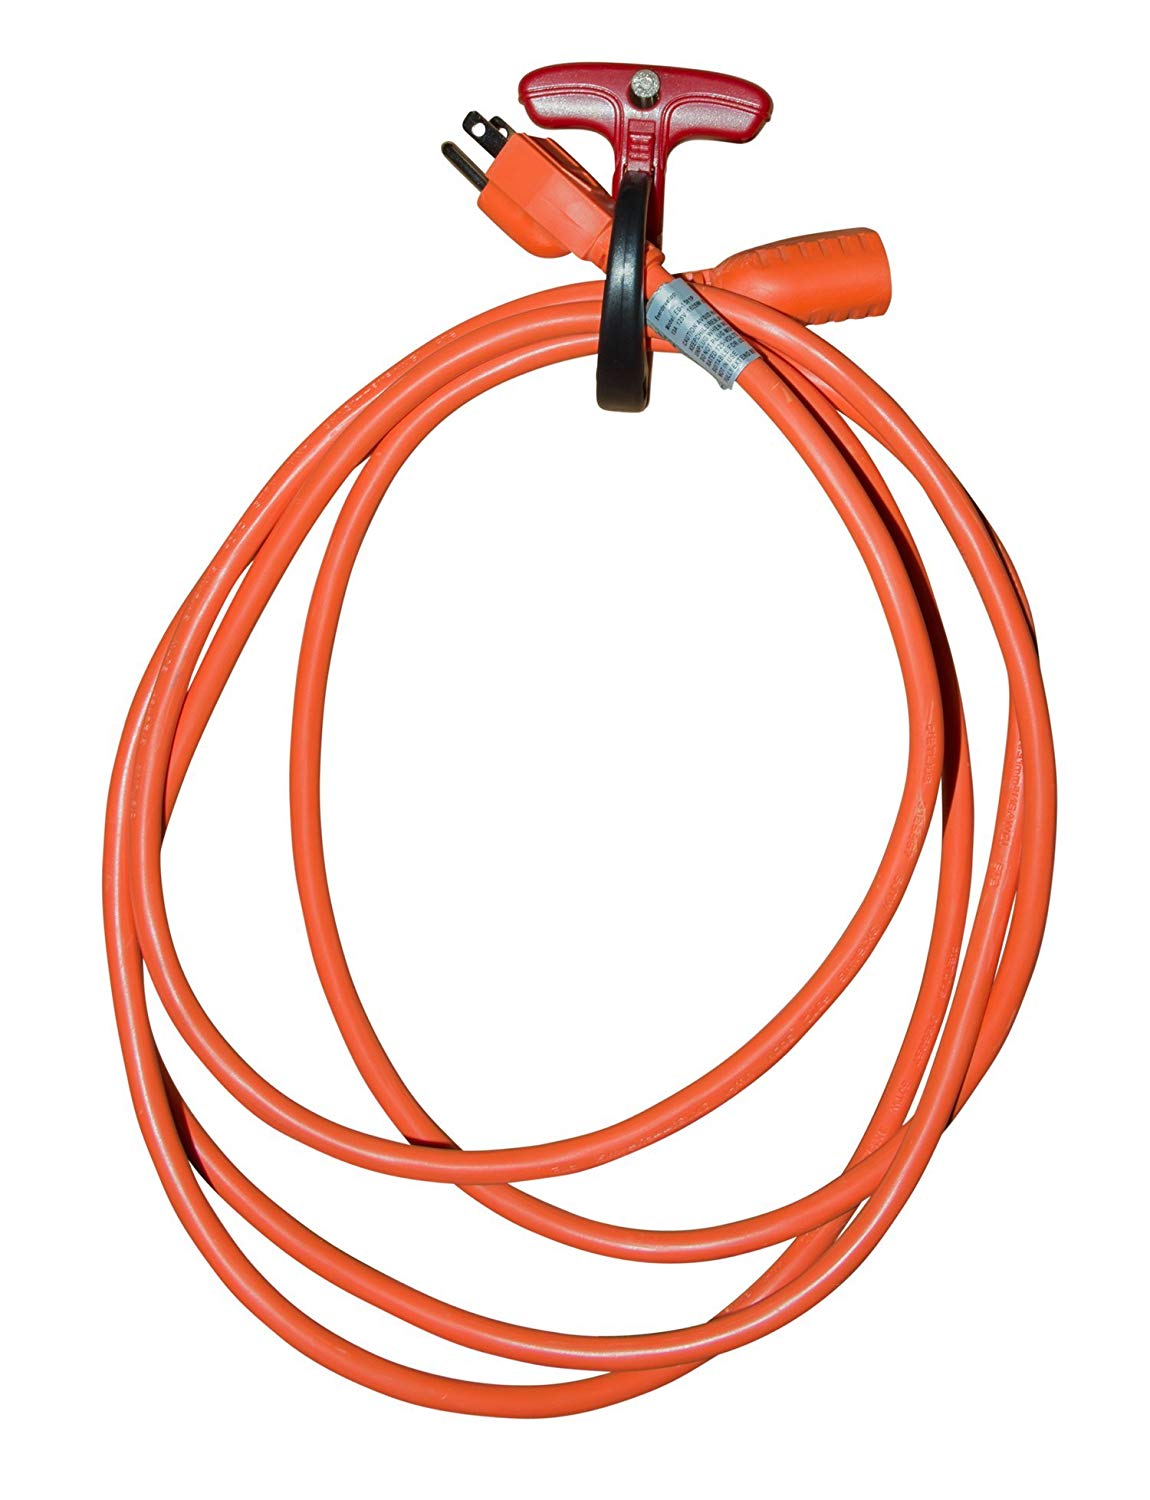 Marinco CW-T1RR50 Cable Wraptor, Small